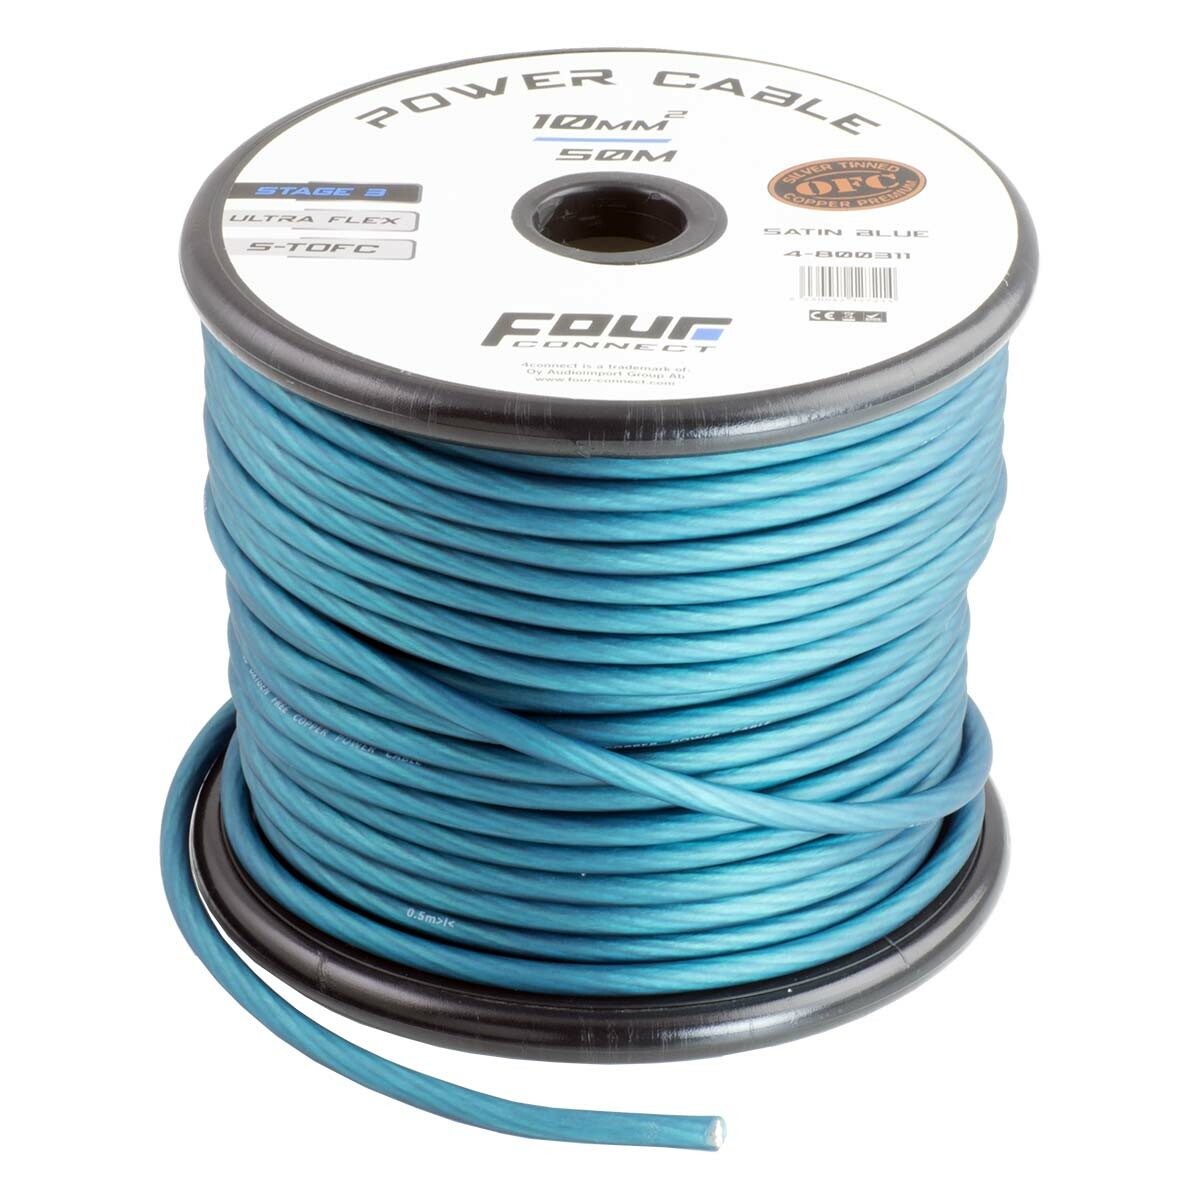 FOUR Connect 4-800311 STAGE3 10mm2 Satin Blue S-TOFC power cable